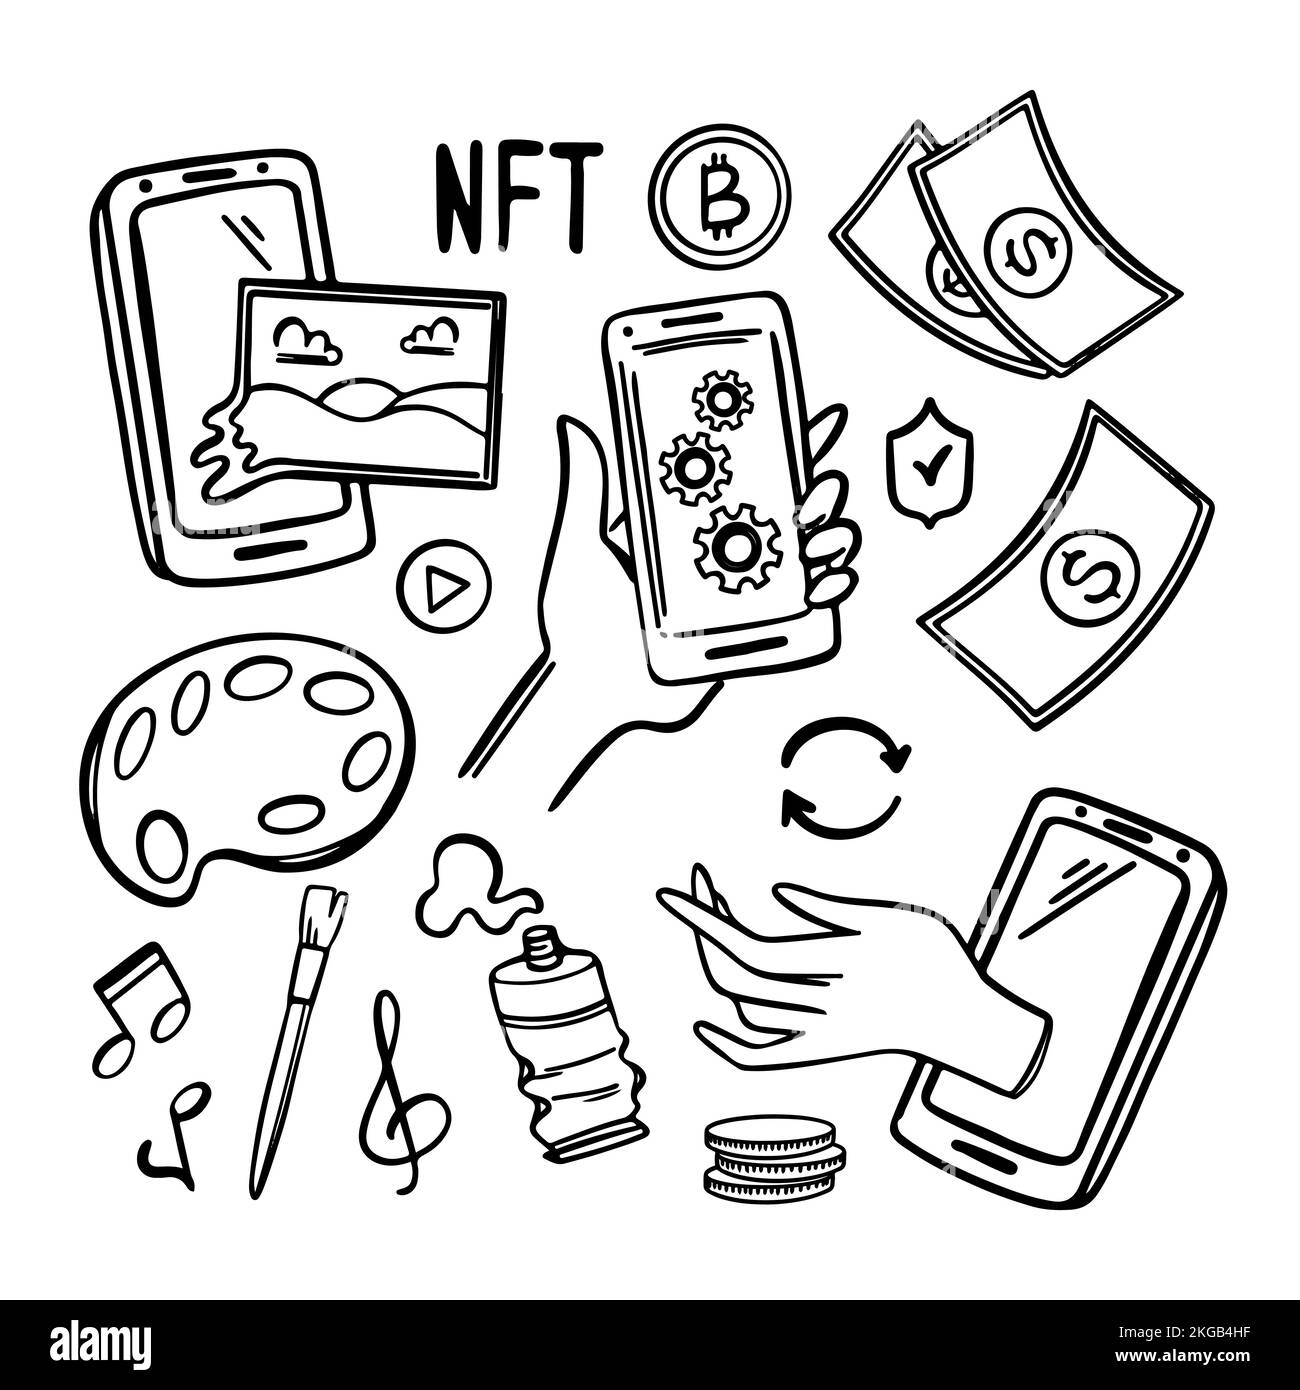 DIGITAL ART SALE MONOCHROME Online Marketplace With Non-fungible Token Currency Blockchain Unique Art Network Technology For Virtual Trade Crypto Stor Stock Vector